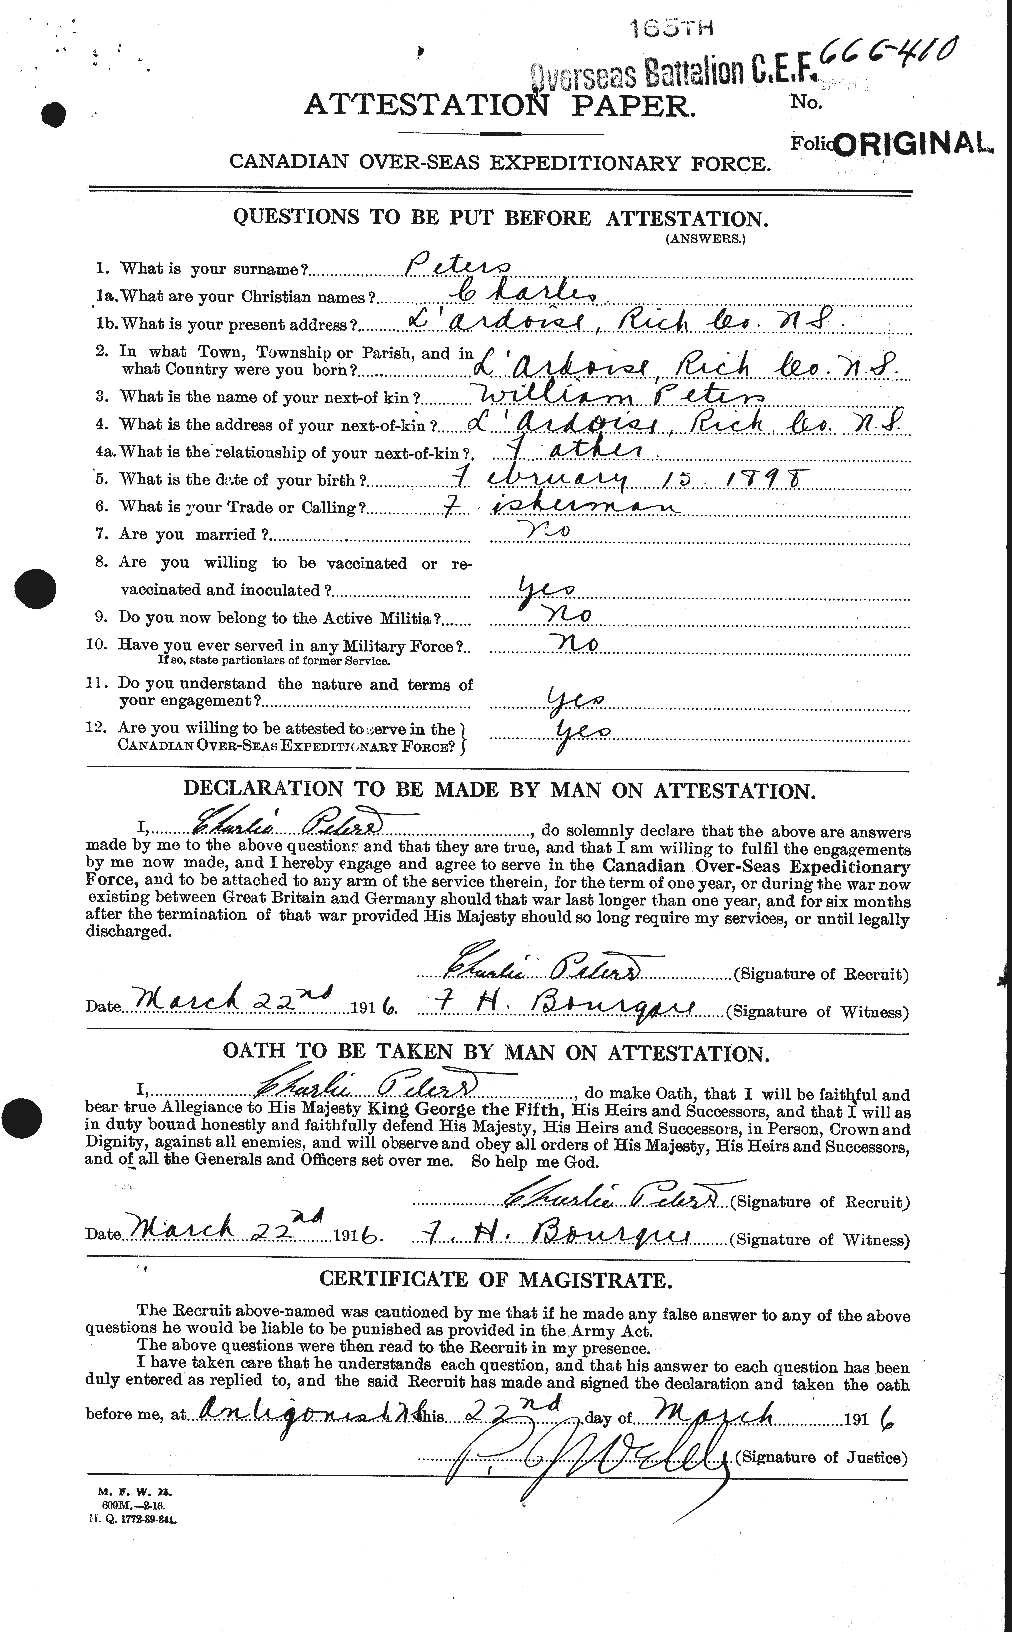 Personnel Records of the First World War - CEF 575365a